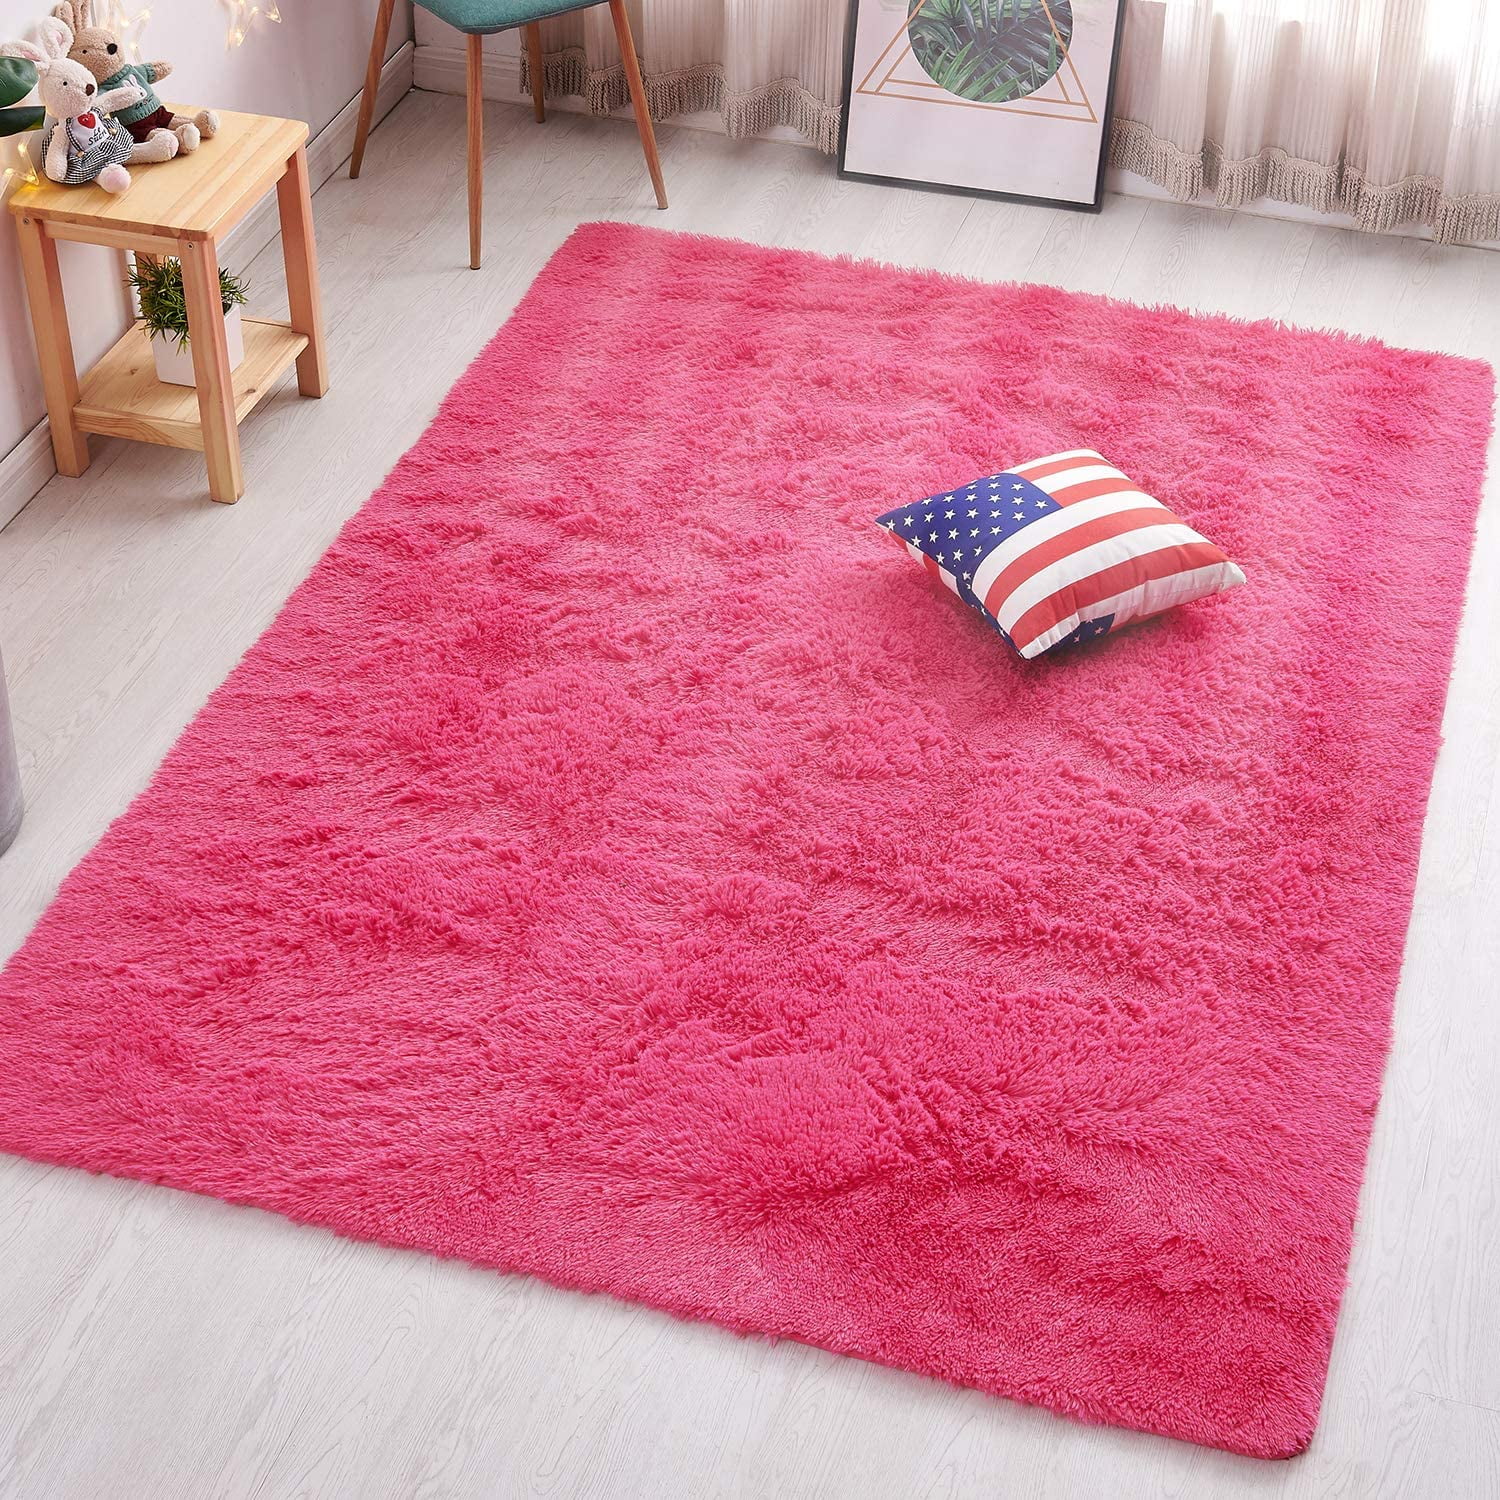 Fashionable And Durable Hot Pink Fluffy Shag Area Rugs For Bedroom 5x7 Soft Fuzzy Shaggy Rugs